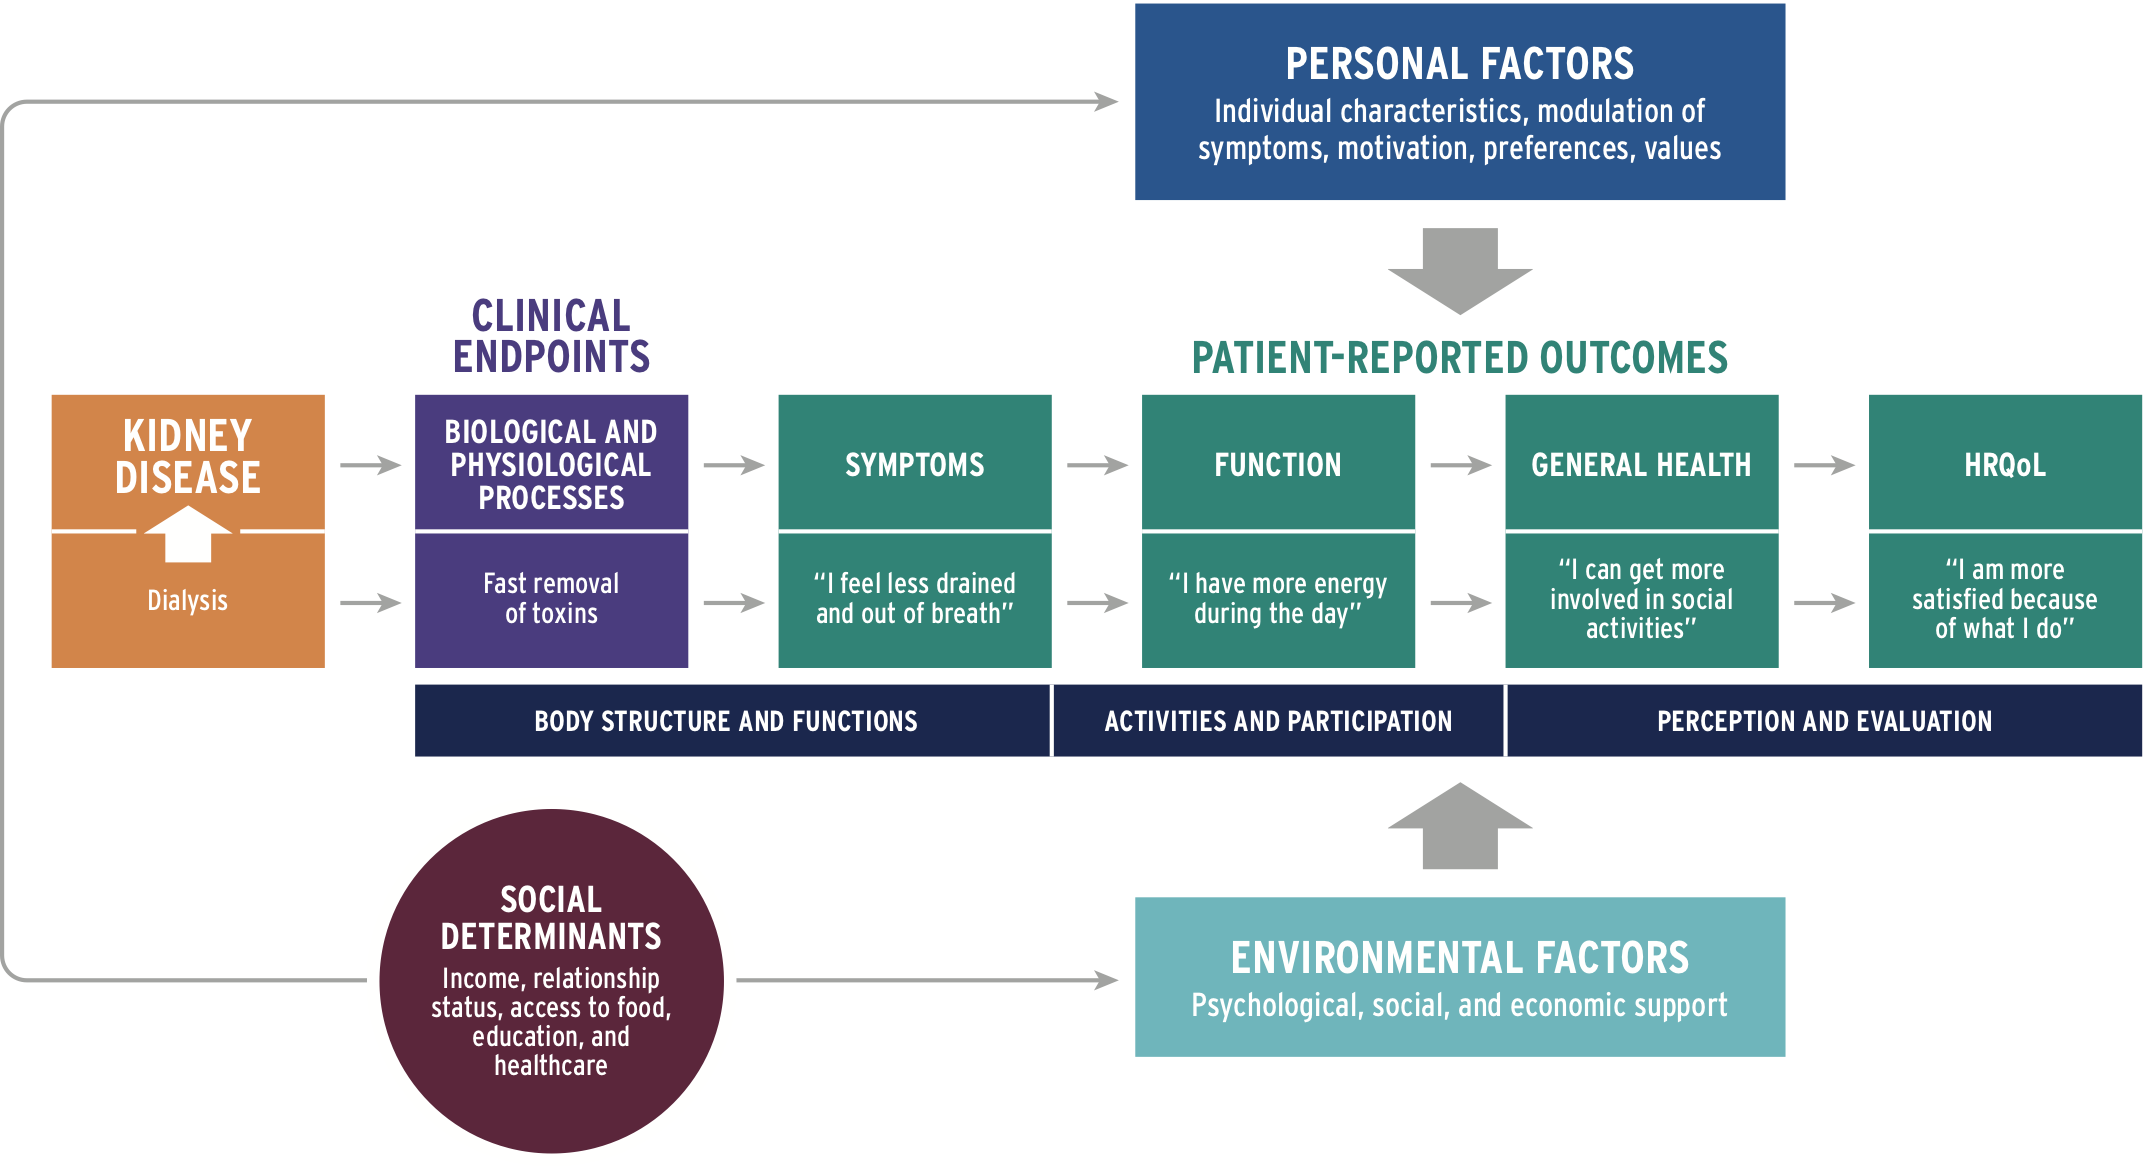 Pathway to health-related quality of life, developed by Krister Cromm, based on a conceptual model of patient outcomes. 